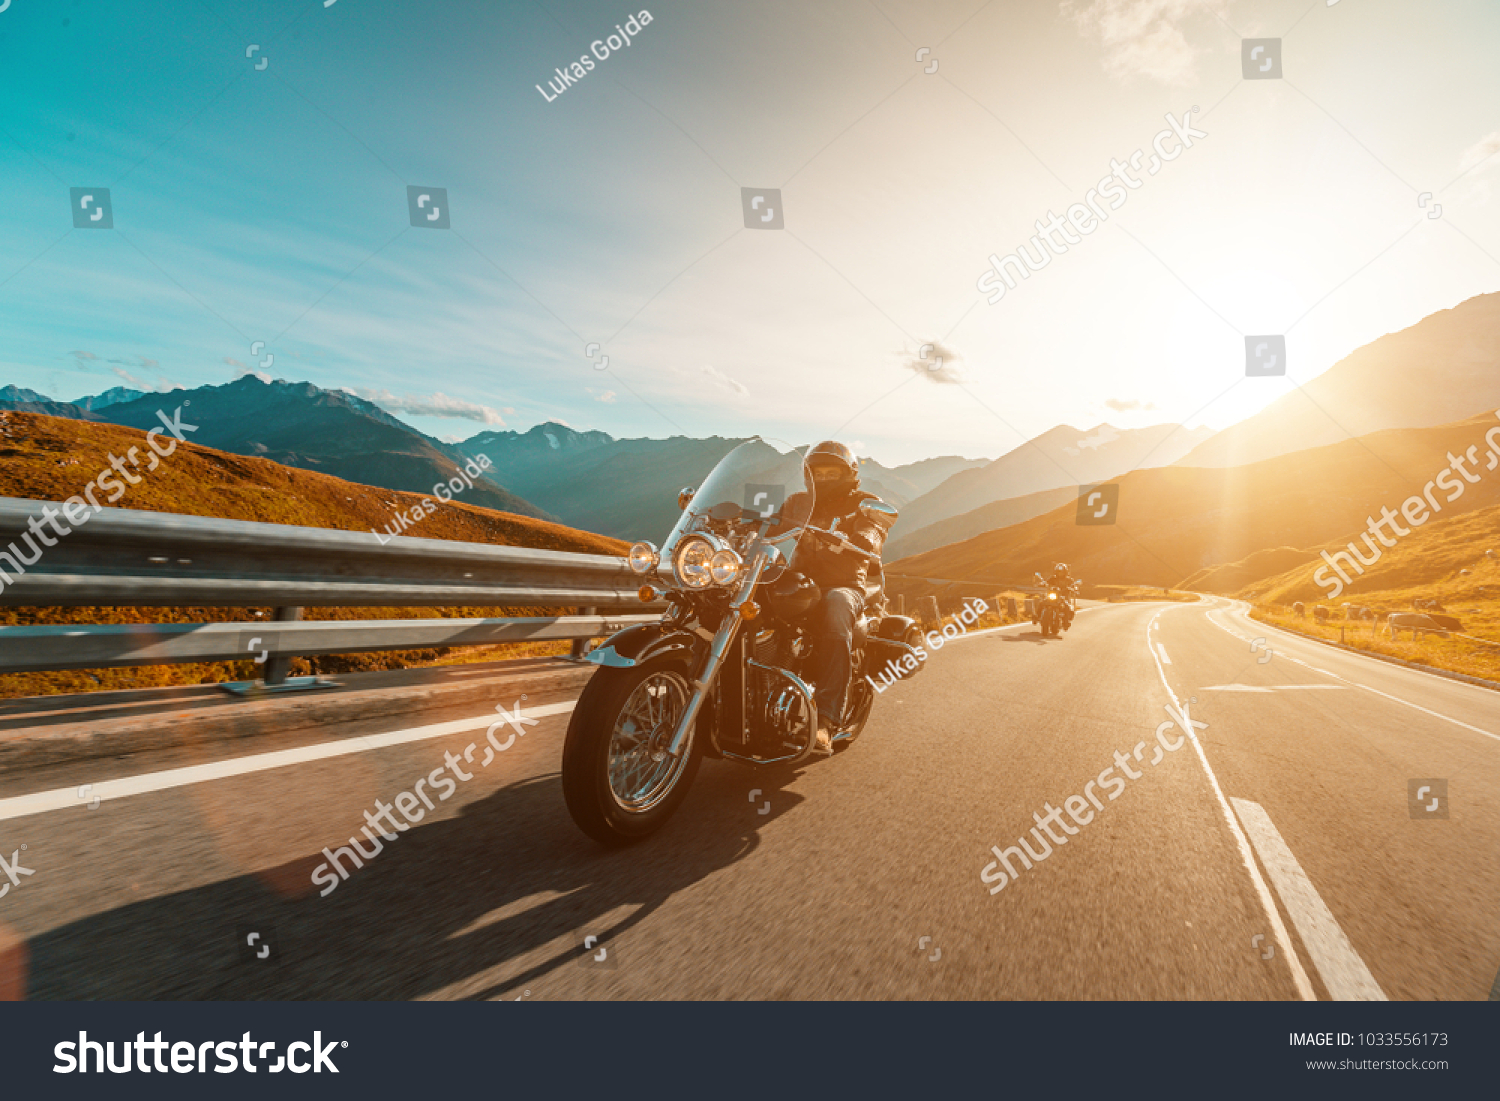 Motorcycle driver riding japanese high power cruiser in Alpine highway on famous Hochalpenstrasse, Austria, central Europe. #1033556173